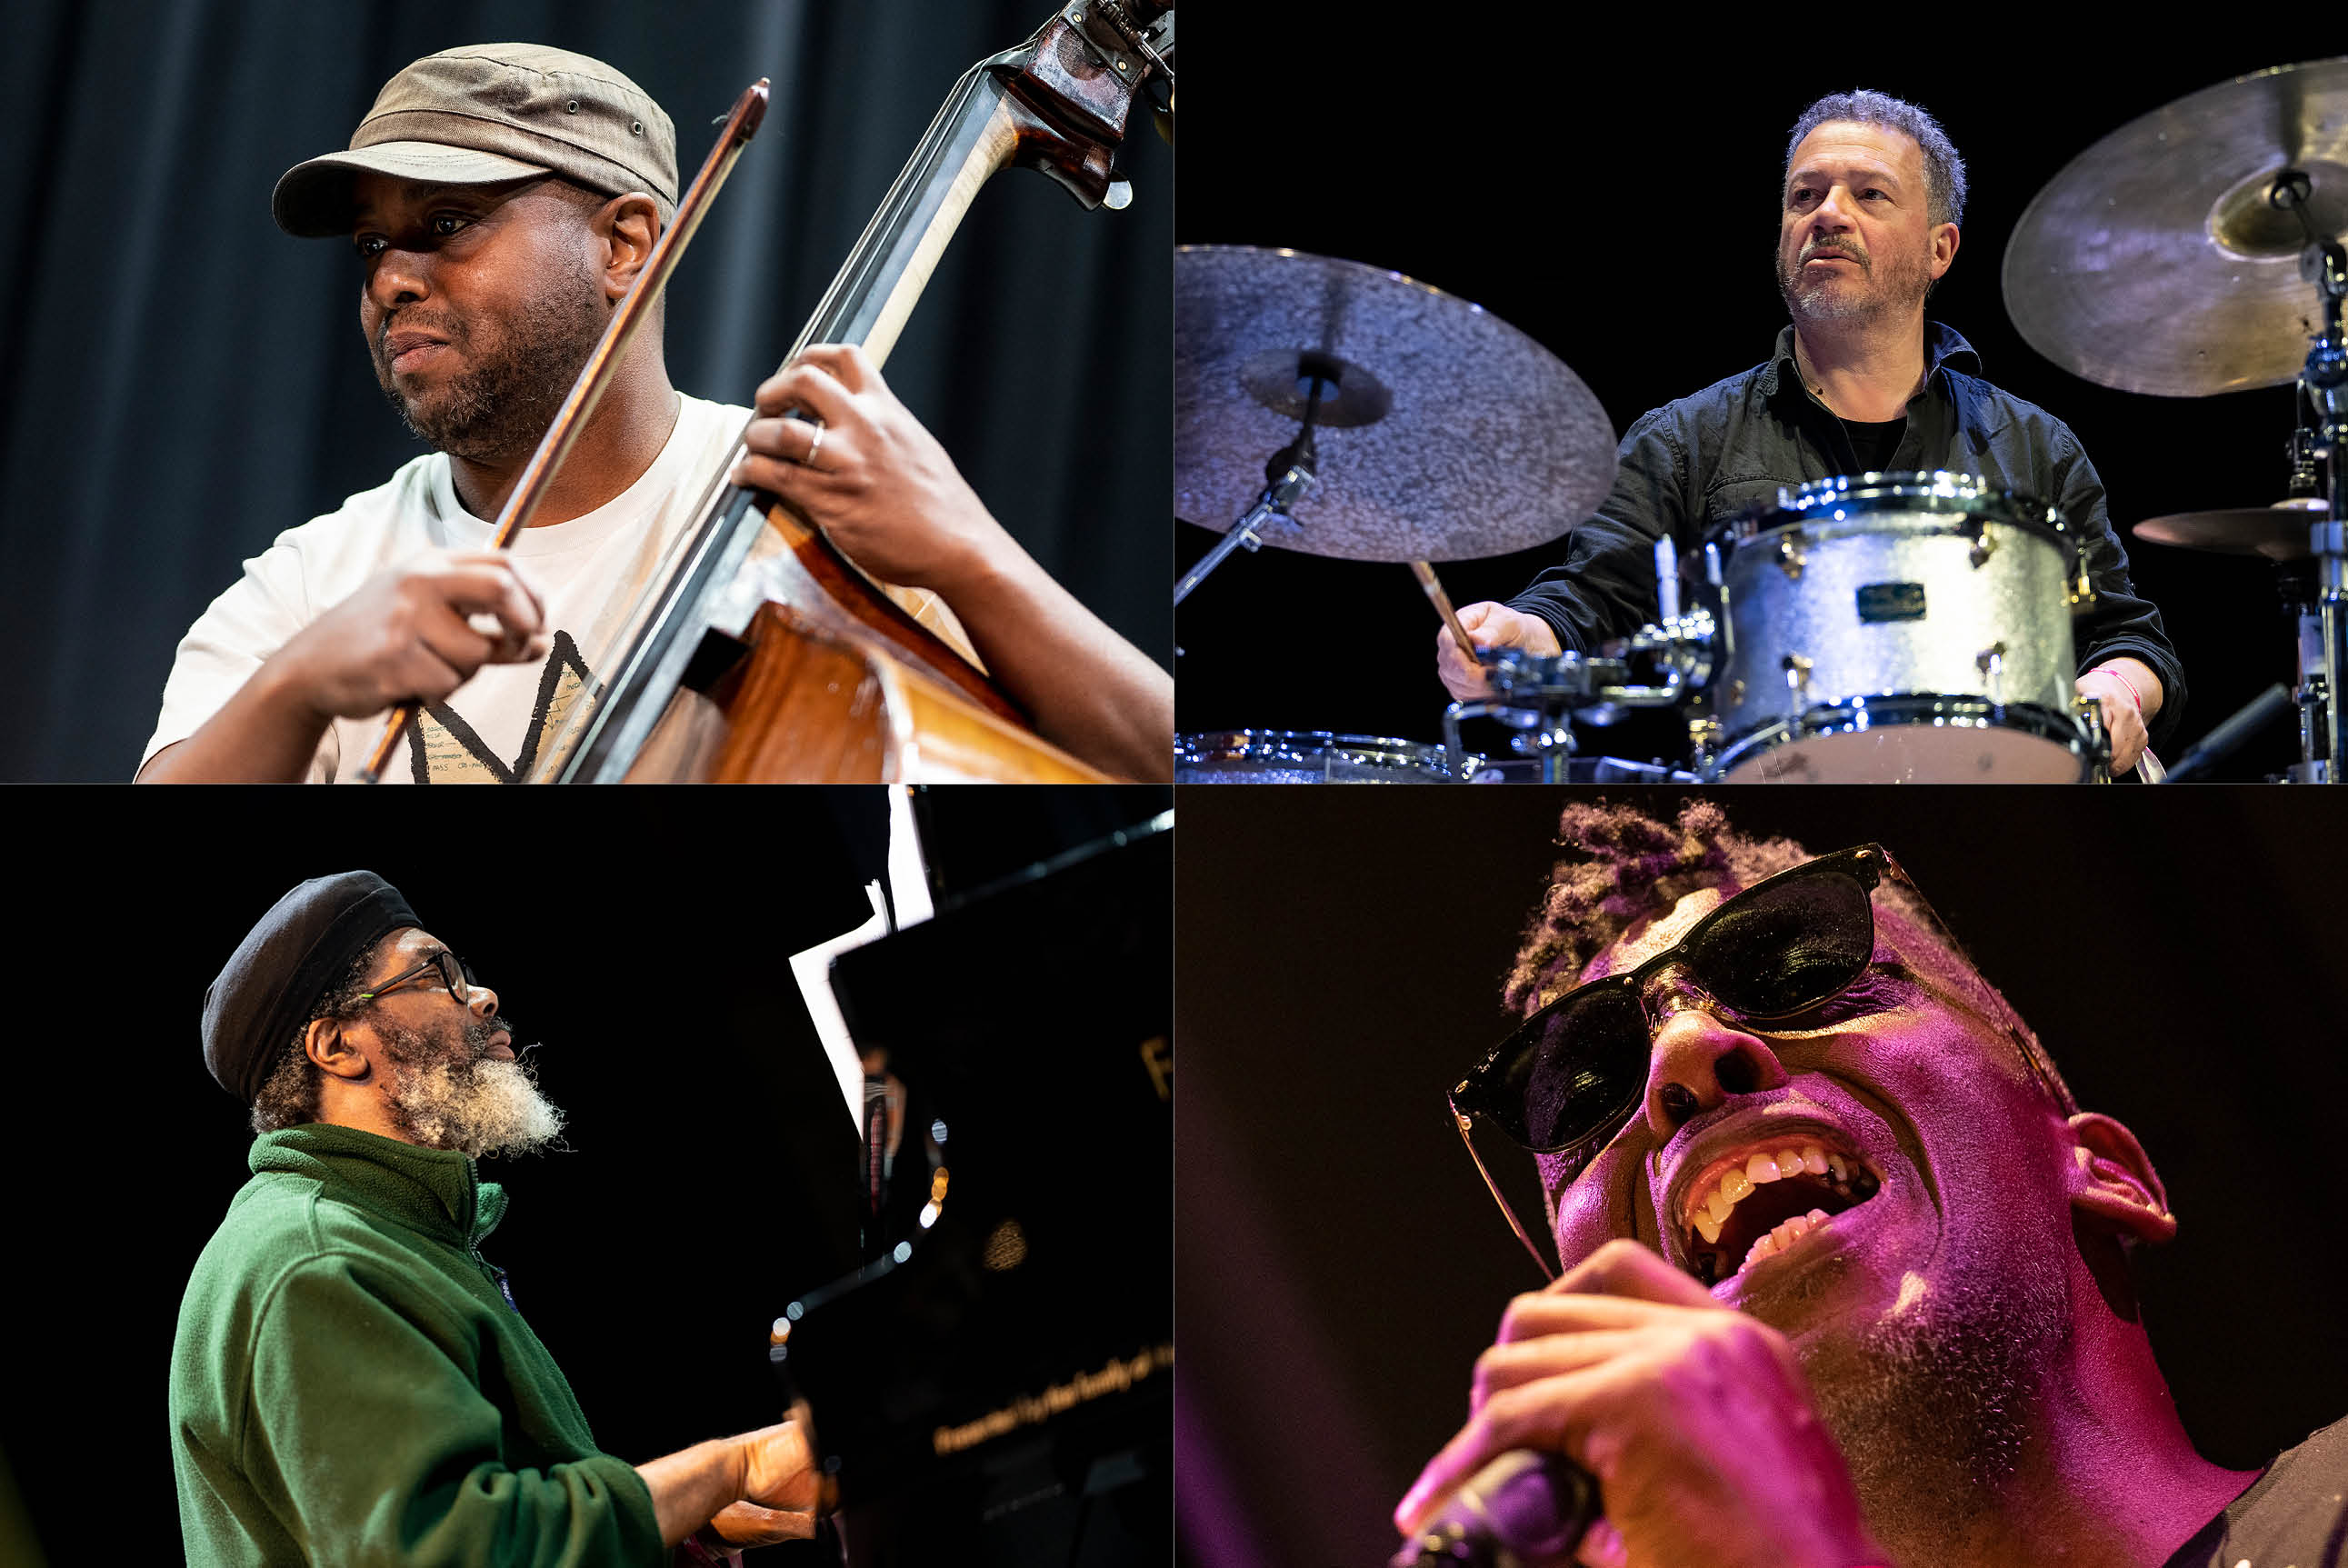 Montage of jazz musicians, Neil Charles, Cleveland Watkiss, Pat Thomas and Mark Sanders.